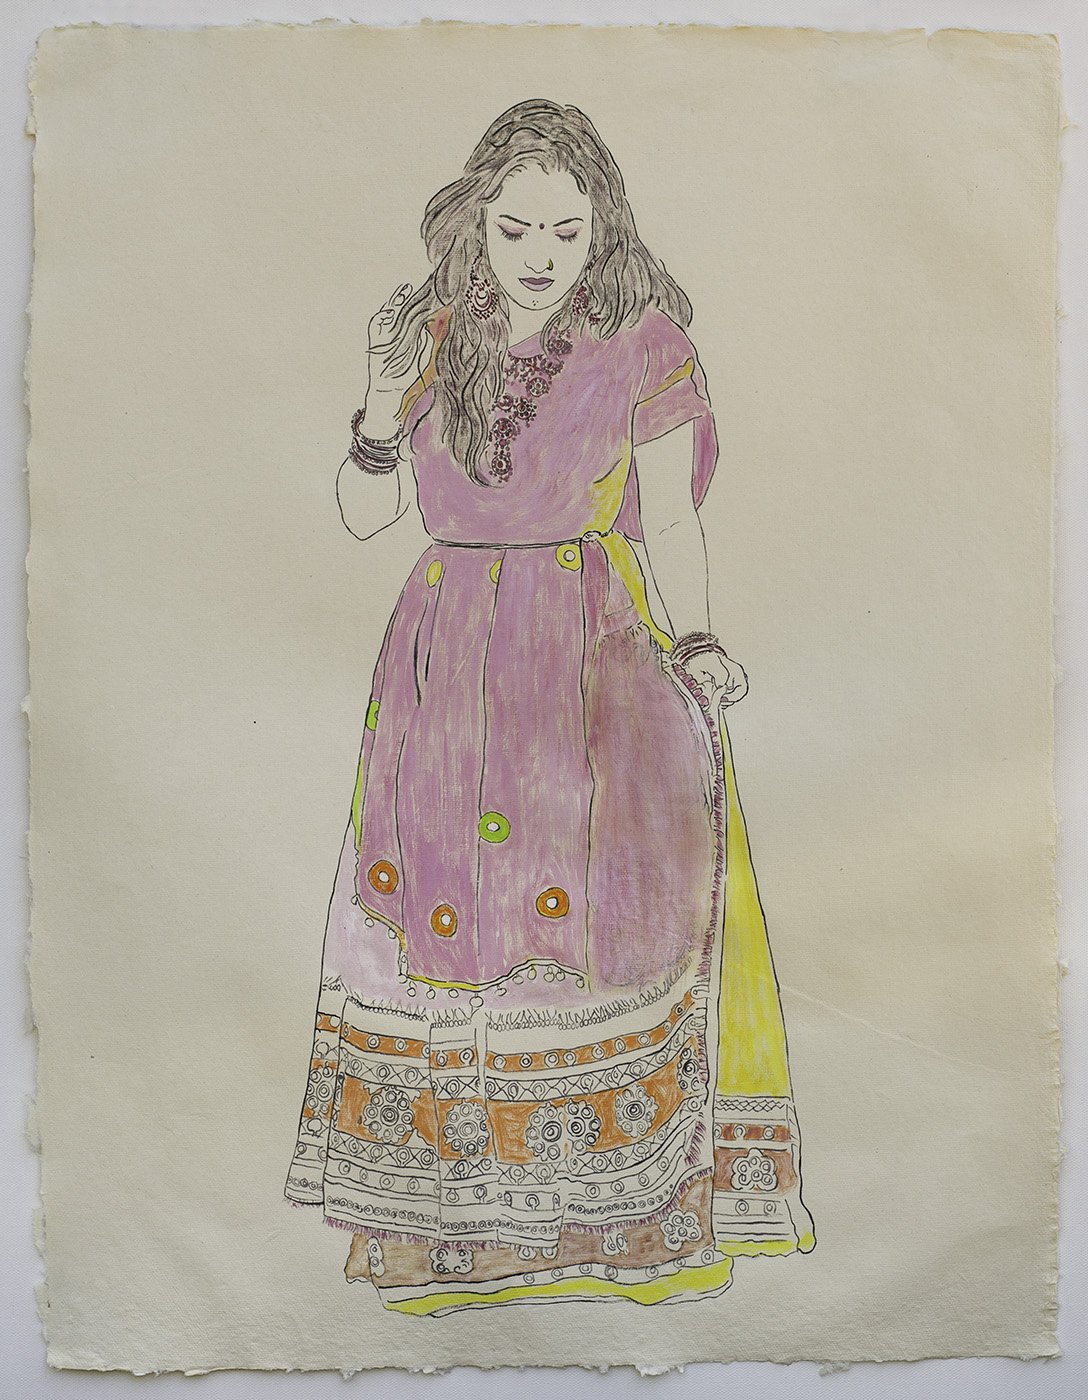   Available    Woman in Traditional Indian Garb   2021, ink, watercolor, and gouache on handmade paper, 25” x 19” 